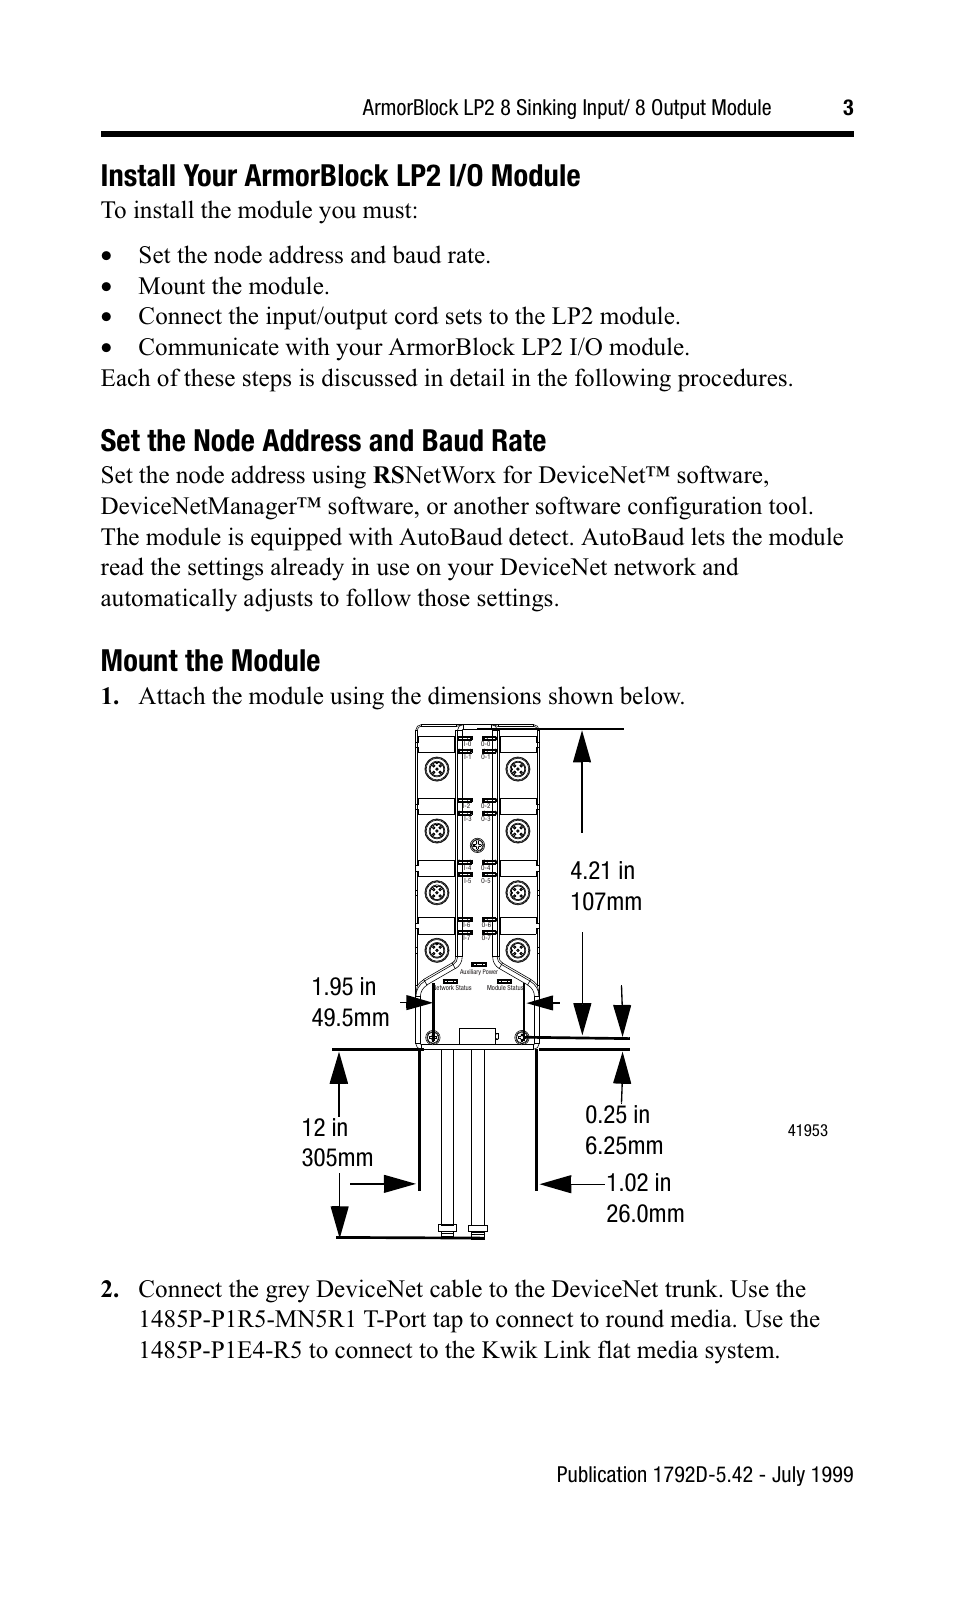 Install your armorblock lp2 i/o module, Set the node address and baud rate, Mount the module | Rockwell Automation 1792D-8BT8LP ArmorBlock LP2 8 Sinking Input/8 Output Modul User Manual | Page 3 / 12